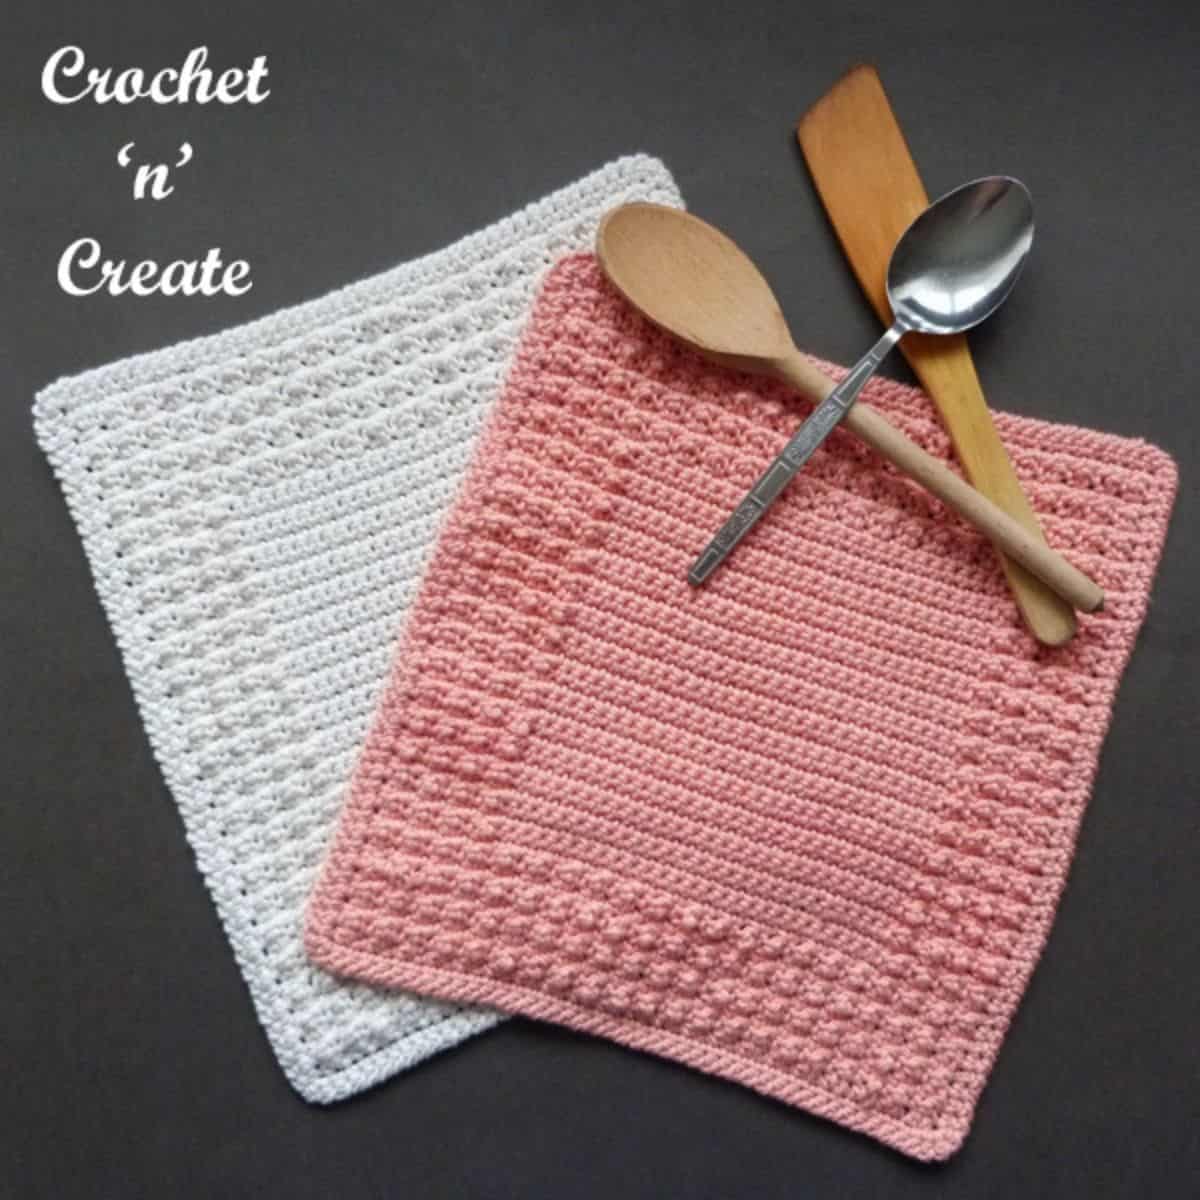 two crochet dishcloths with utensils styled on top